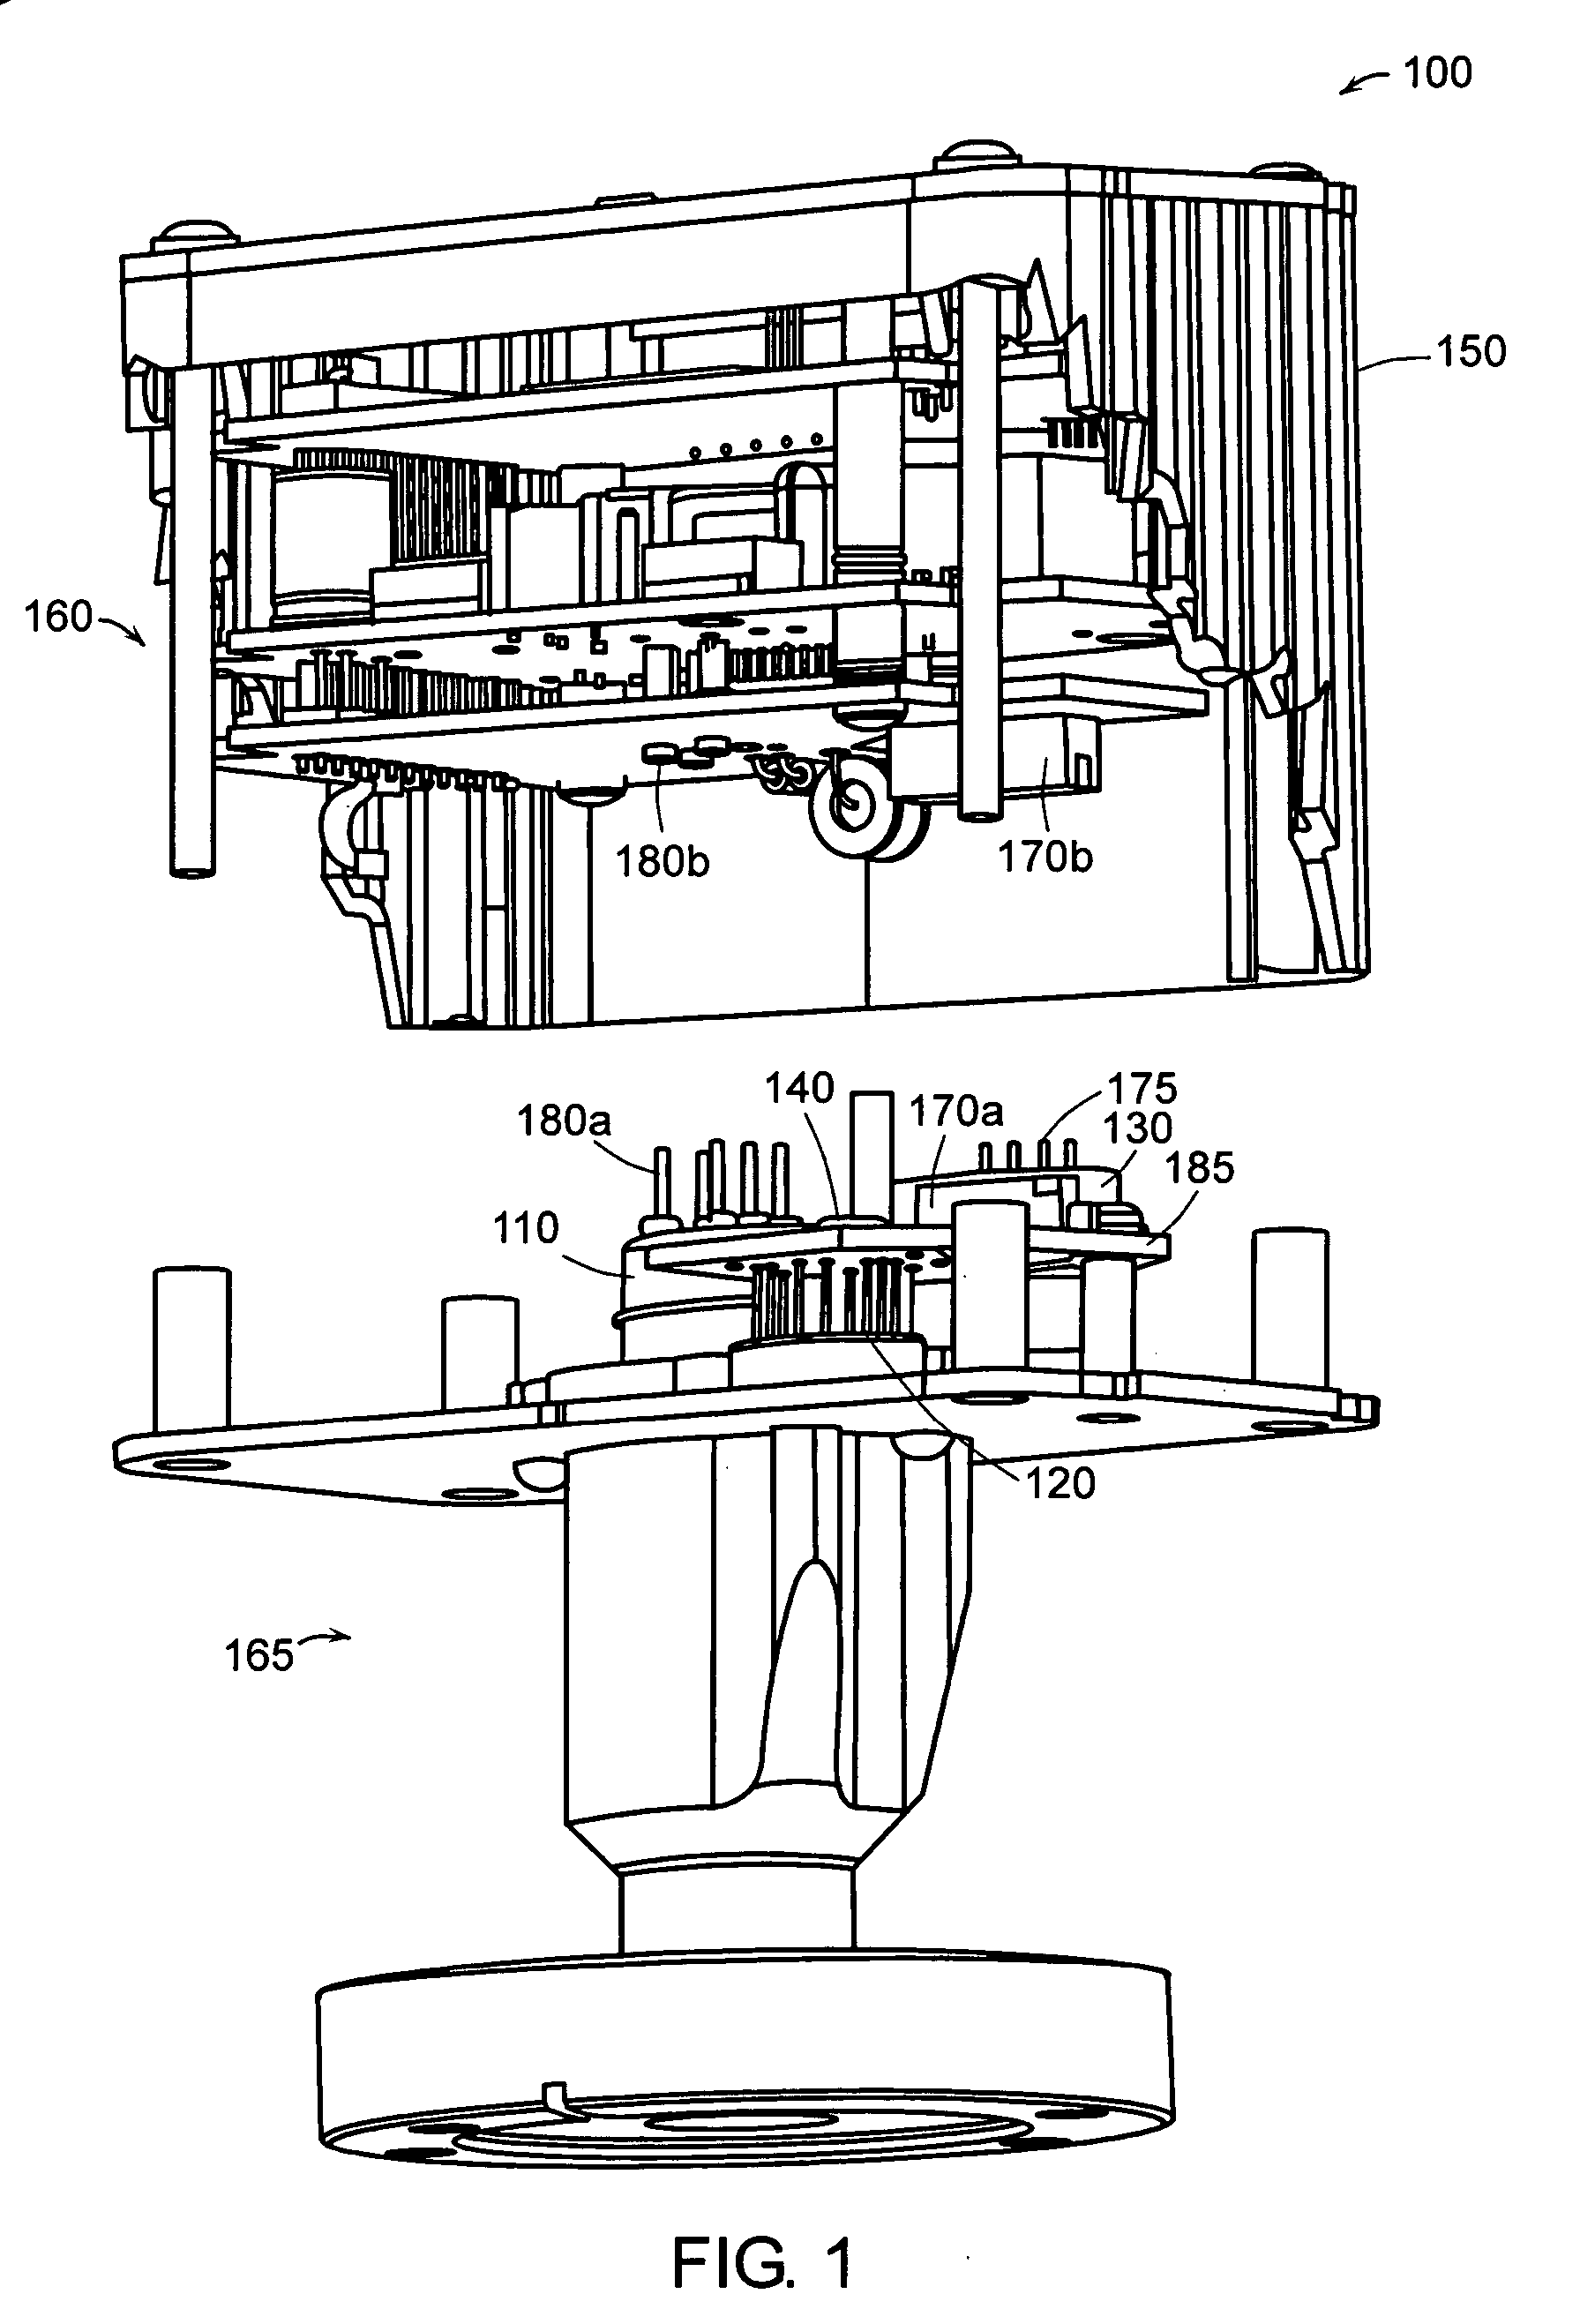 Method and apparatus for storing vacuum gauge calibration parameters and measurement data on a vacuum gauge structure